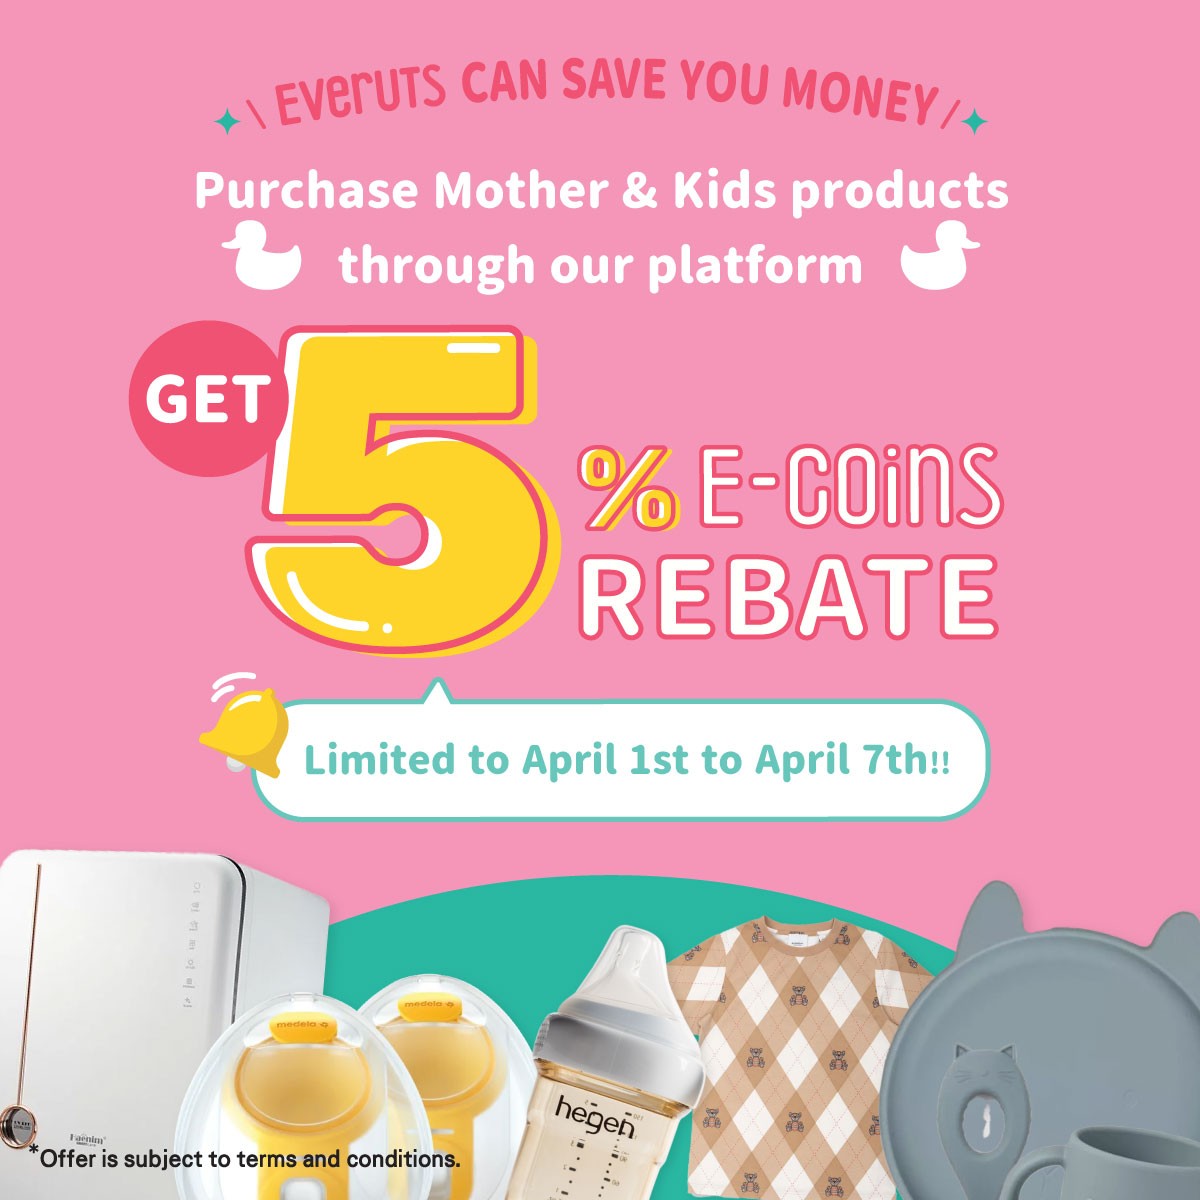 Everuts can save you money